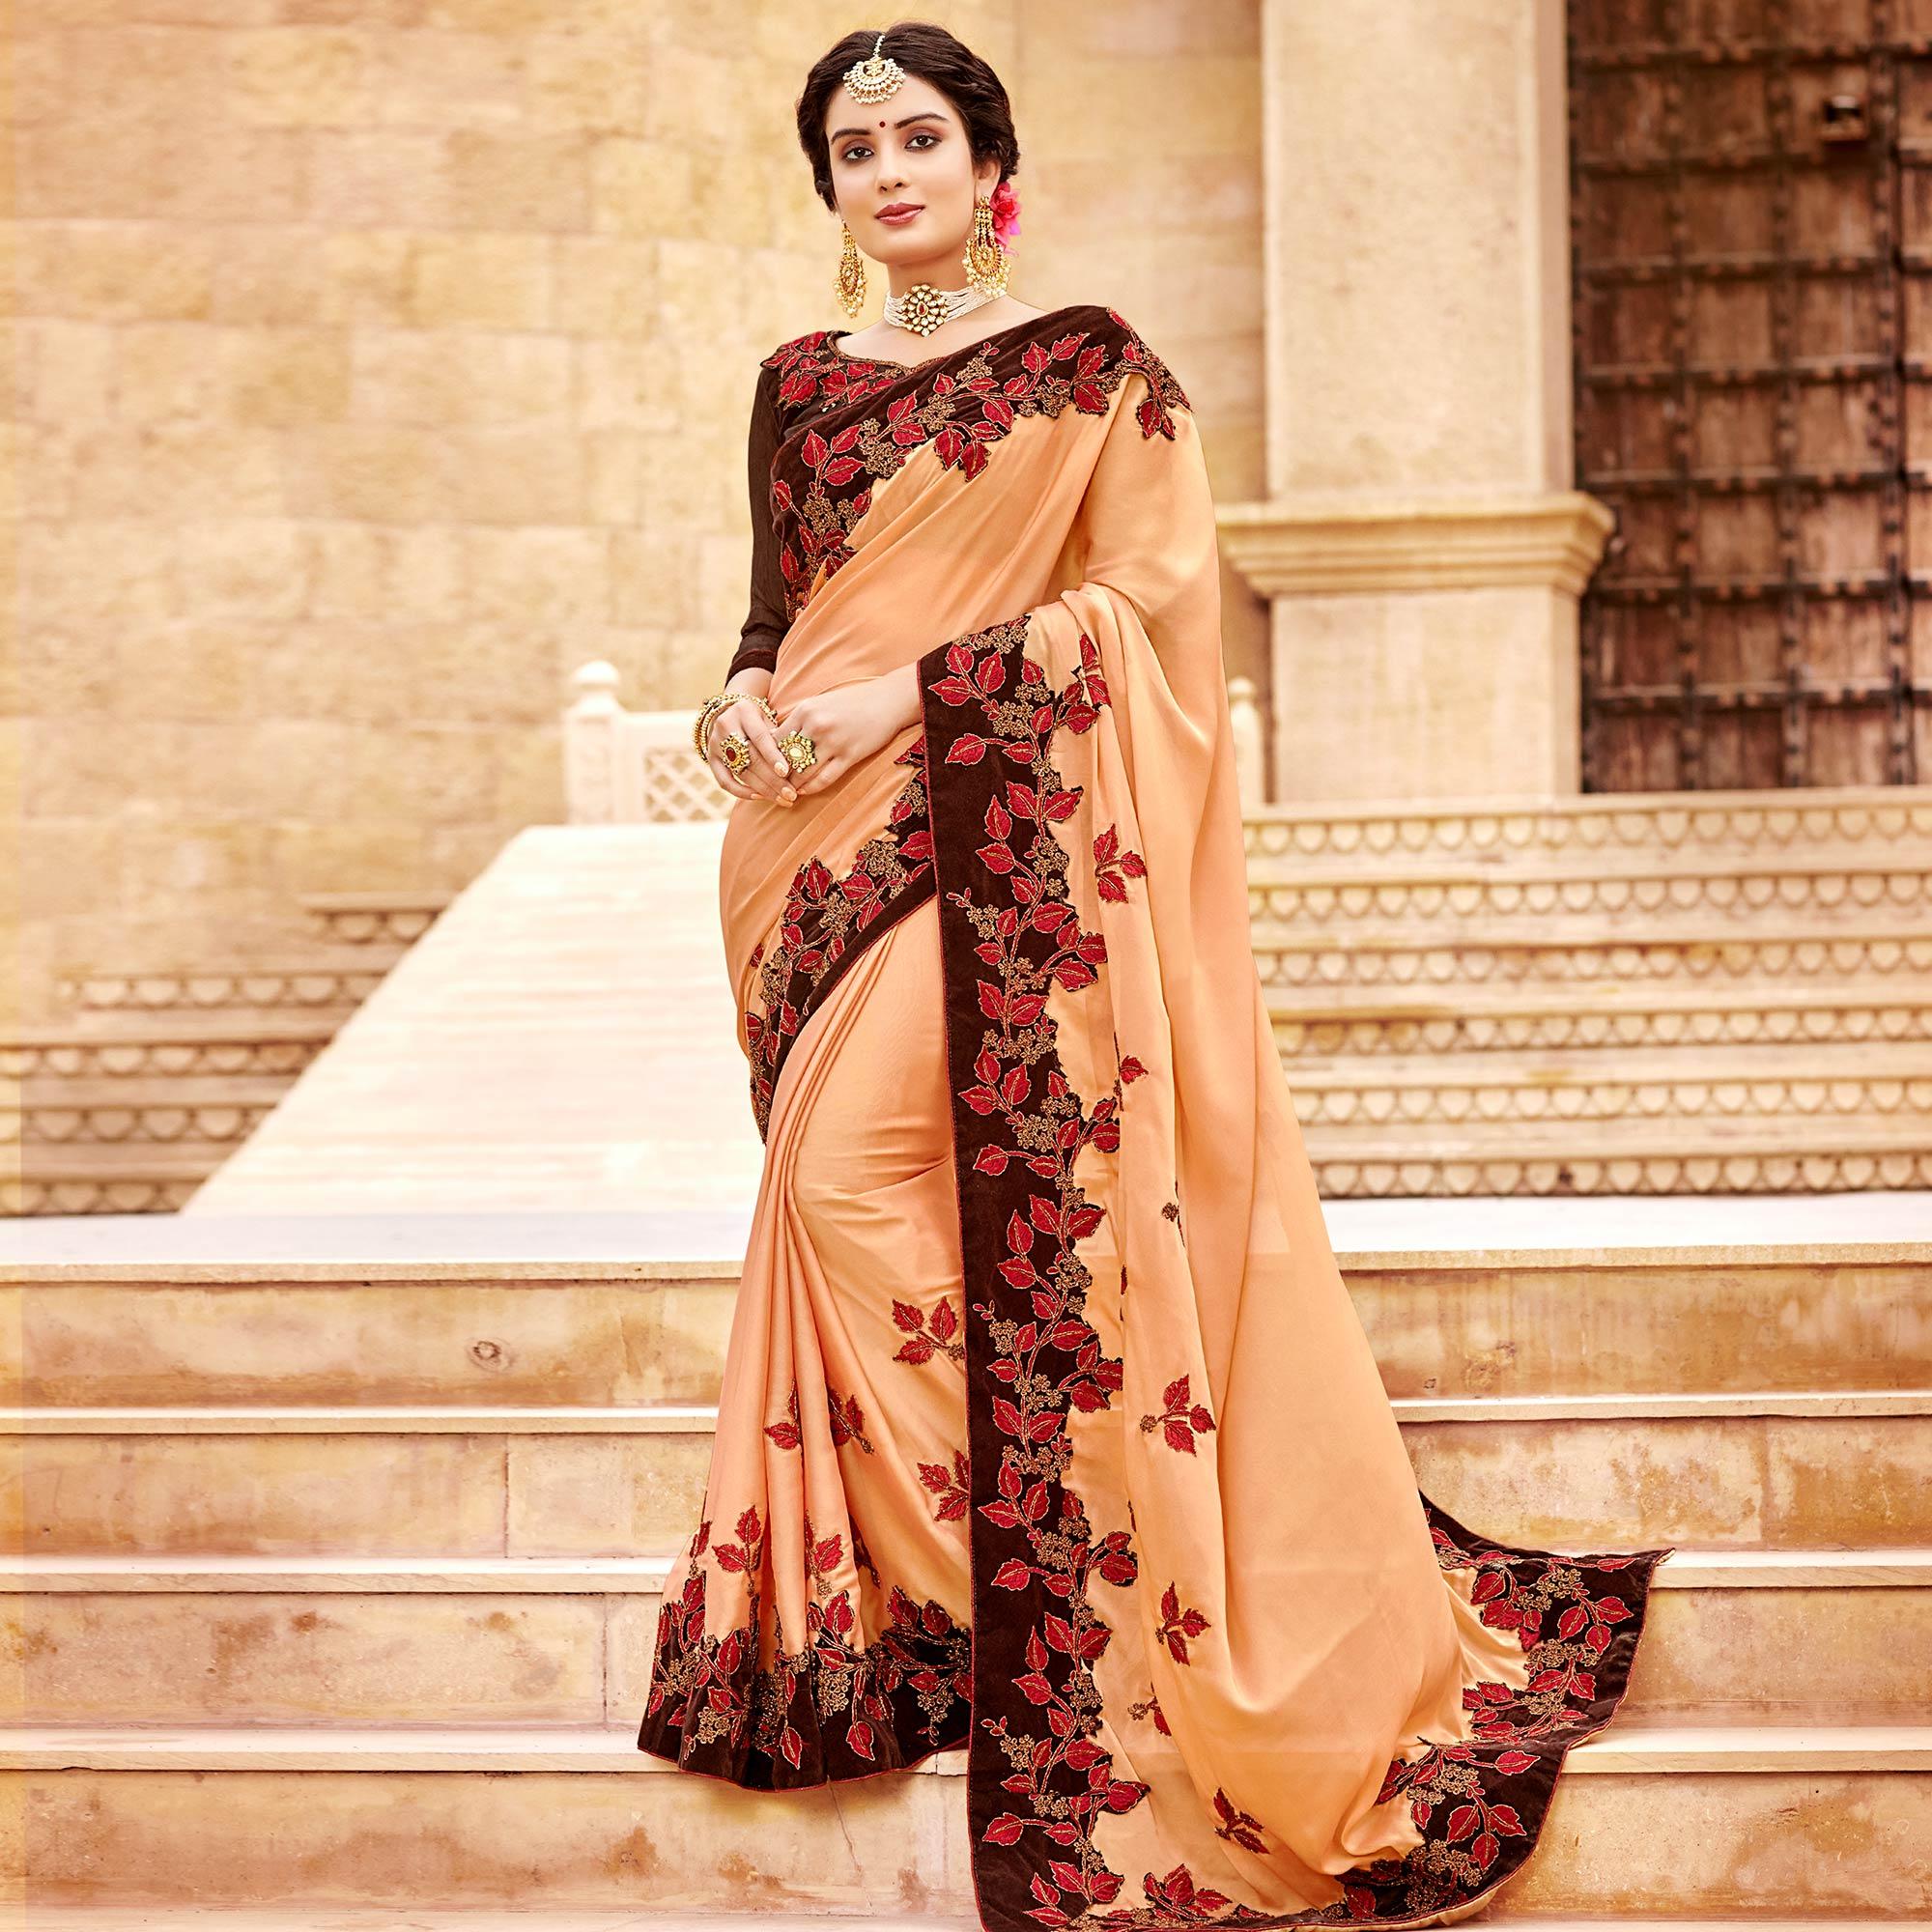 Captivating Peach Colored Party Wear Embroidered Satin-Georegtte Saree - Peachmode